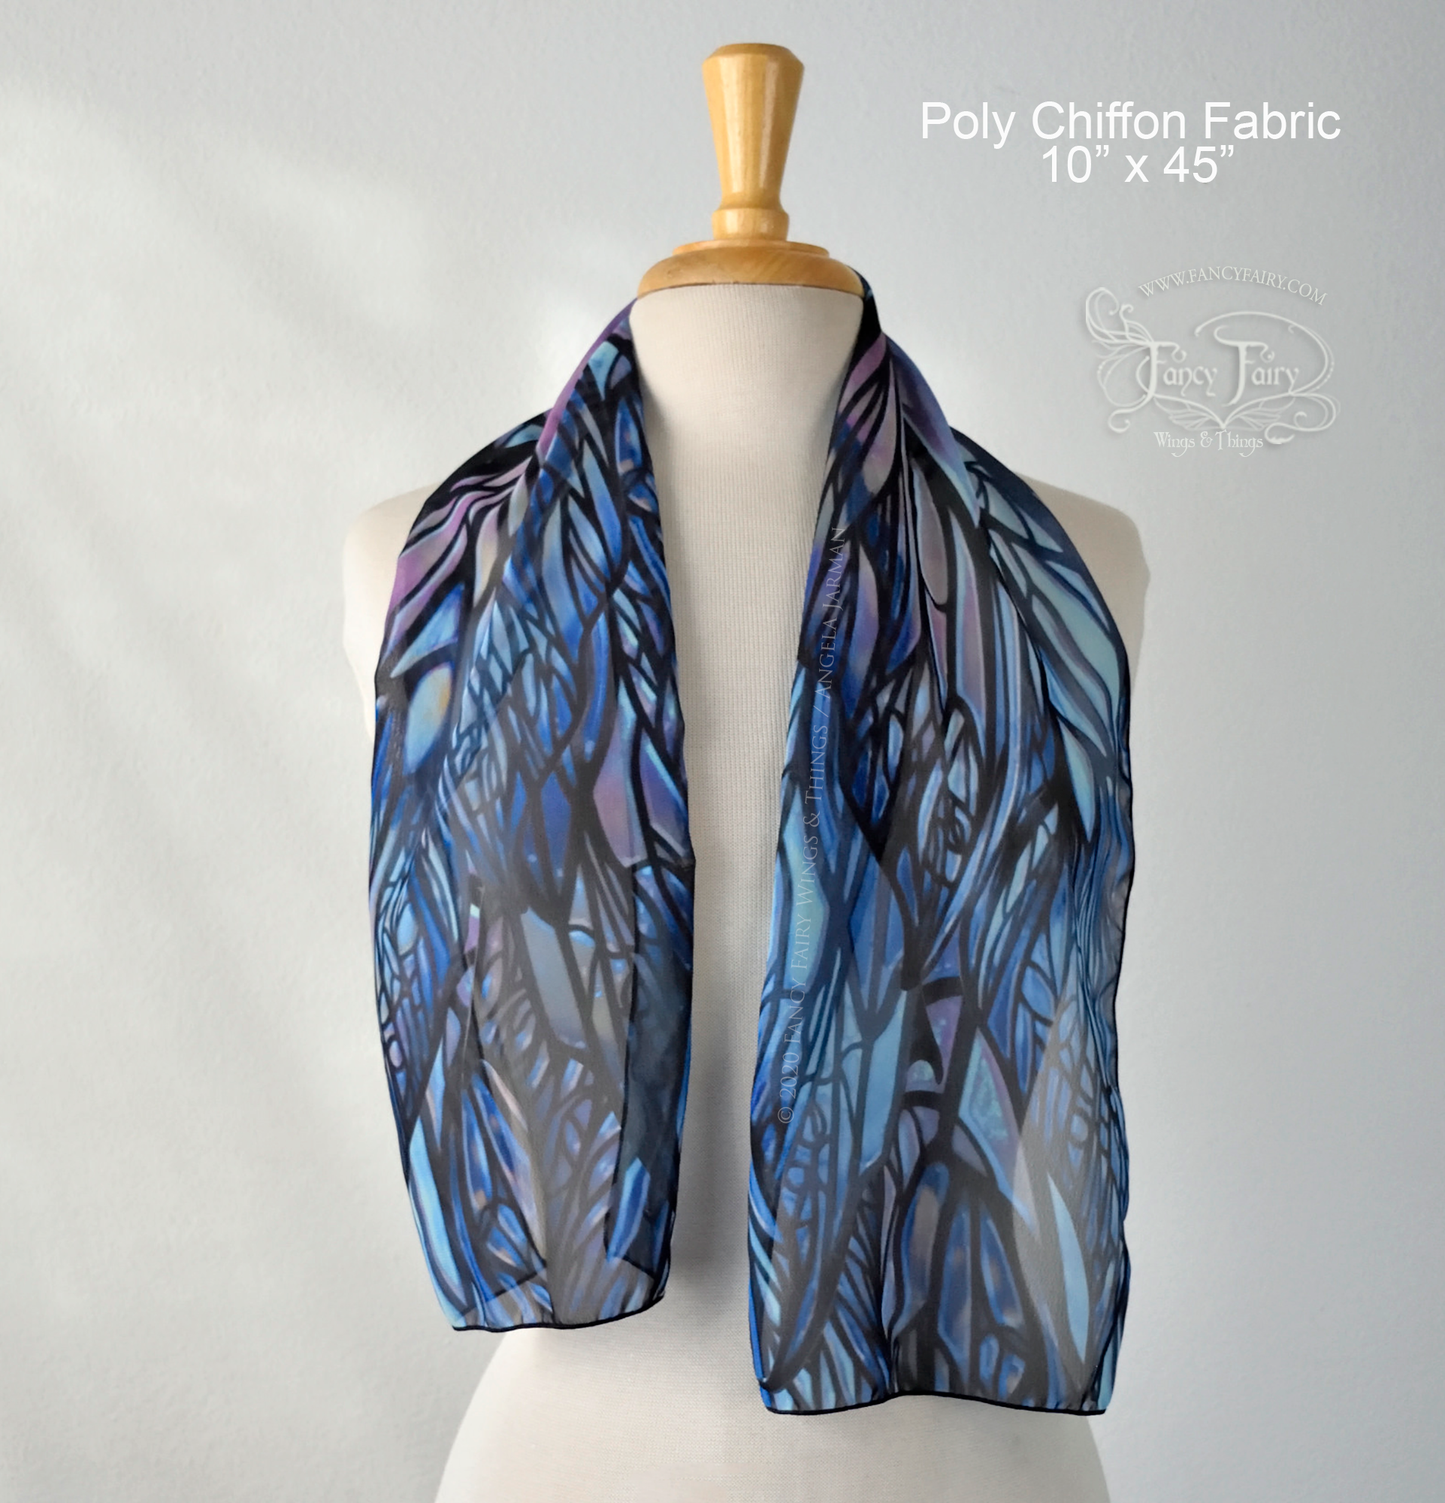 'Colette' Pixish Fairy Wings Long Scarf Made to Order